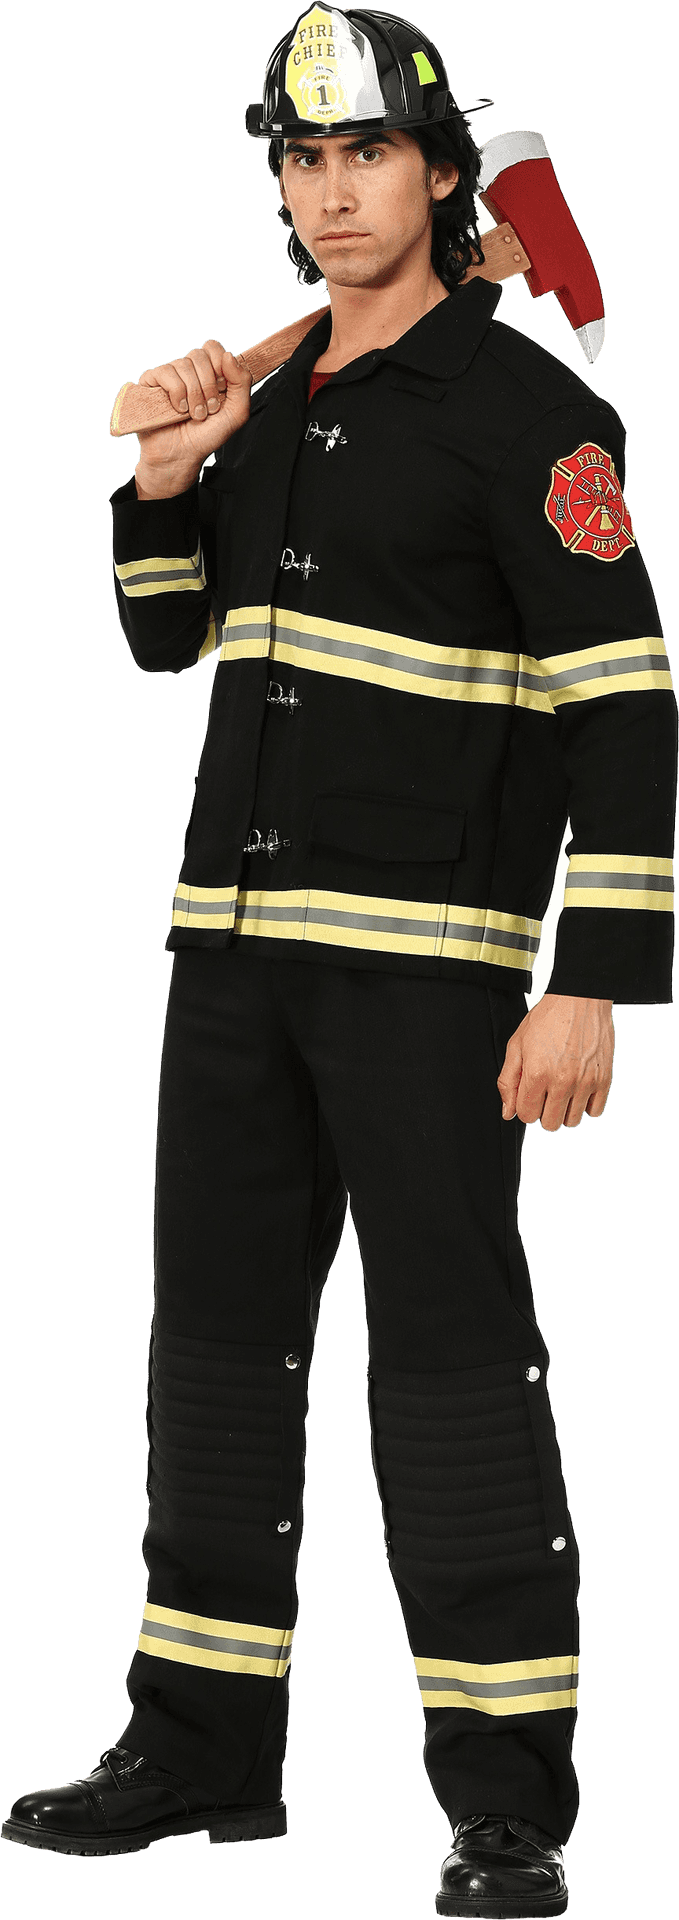 Firefighterin Gear Pose PNG image